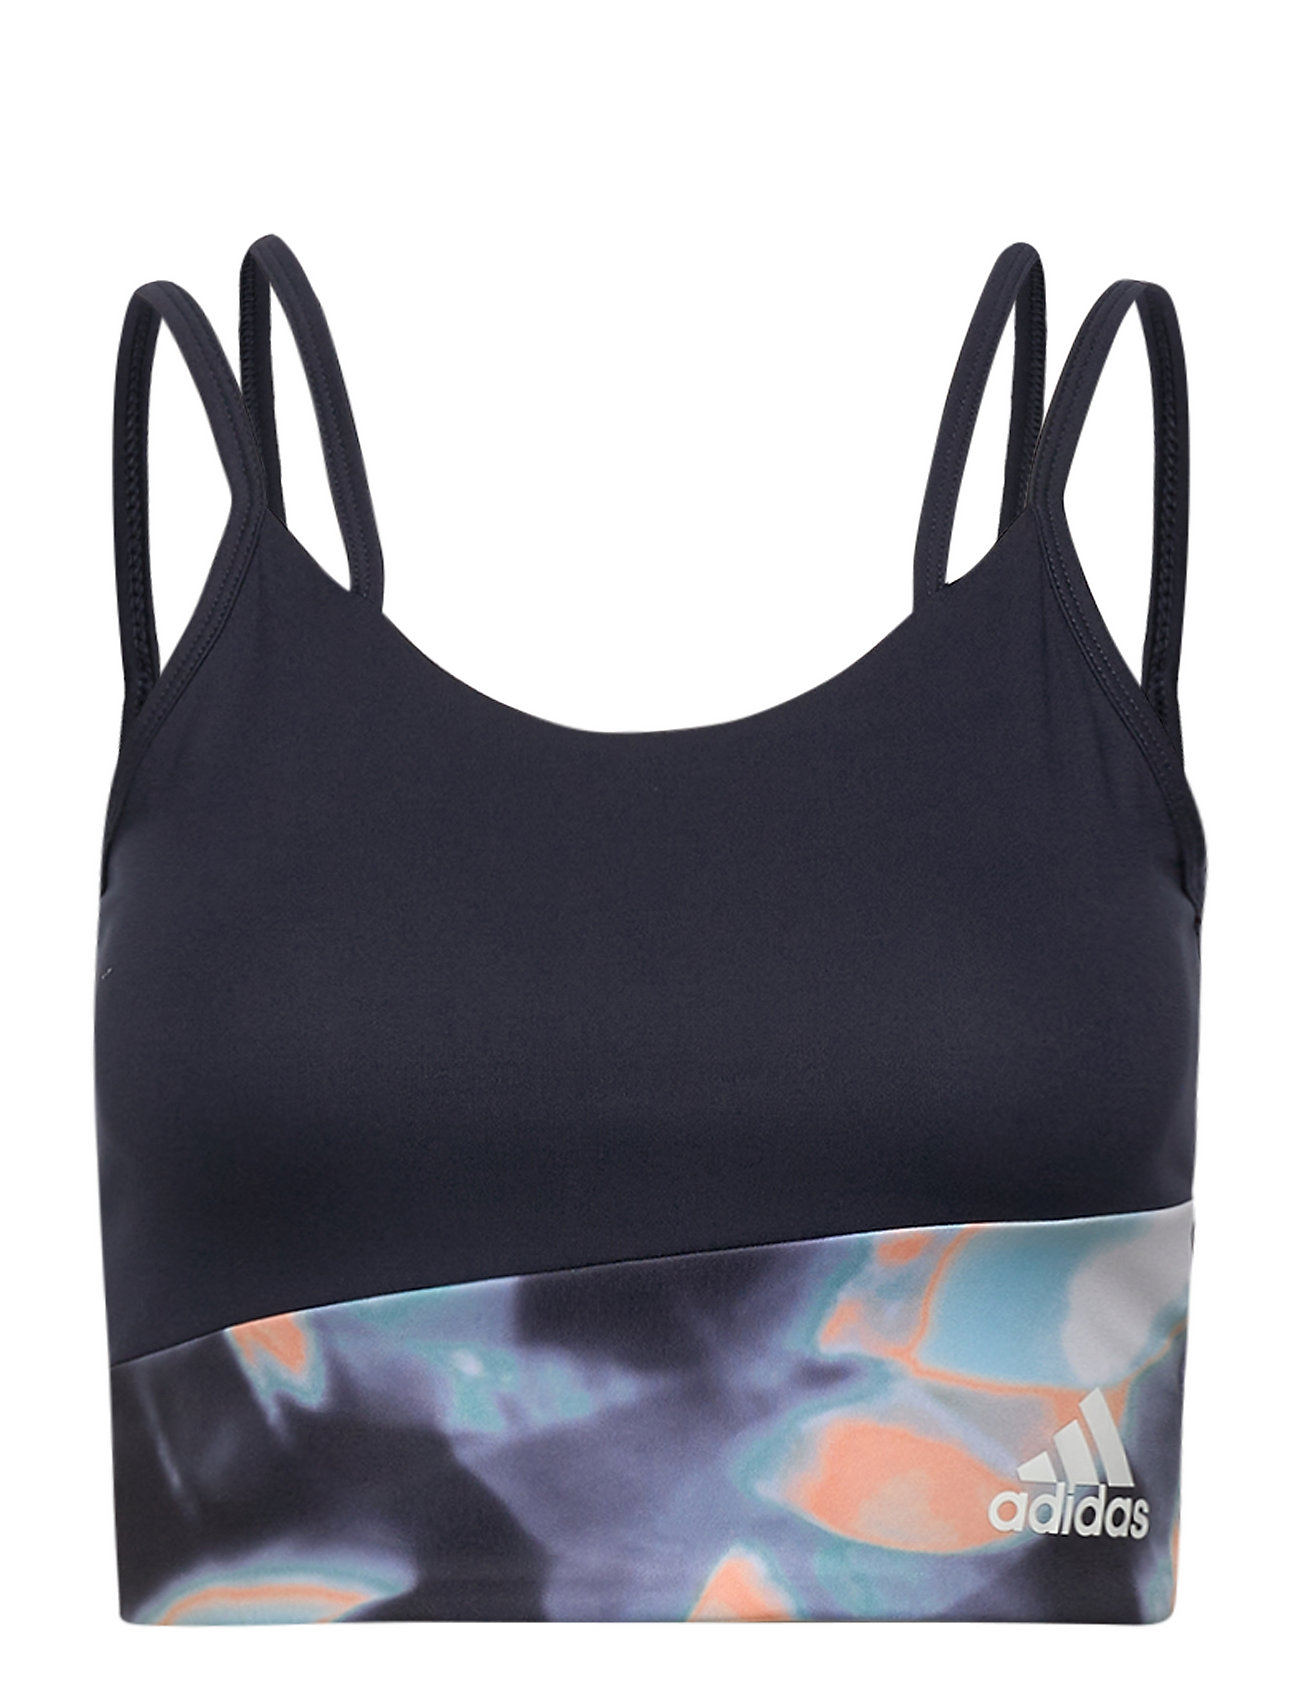 Aeroready You For You Low Support Bra Top W Lingerie Bras & Tops Sports Bras - ALL Musta Adidas Performance, adidas Performance